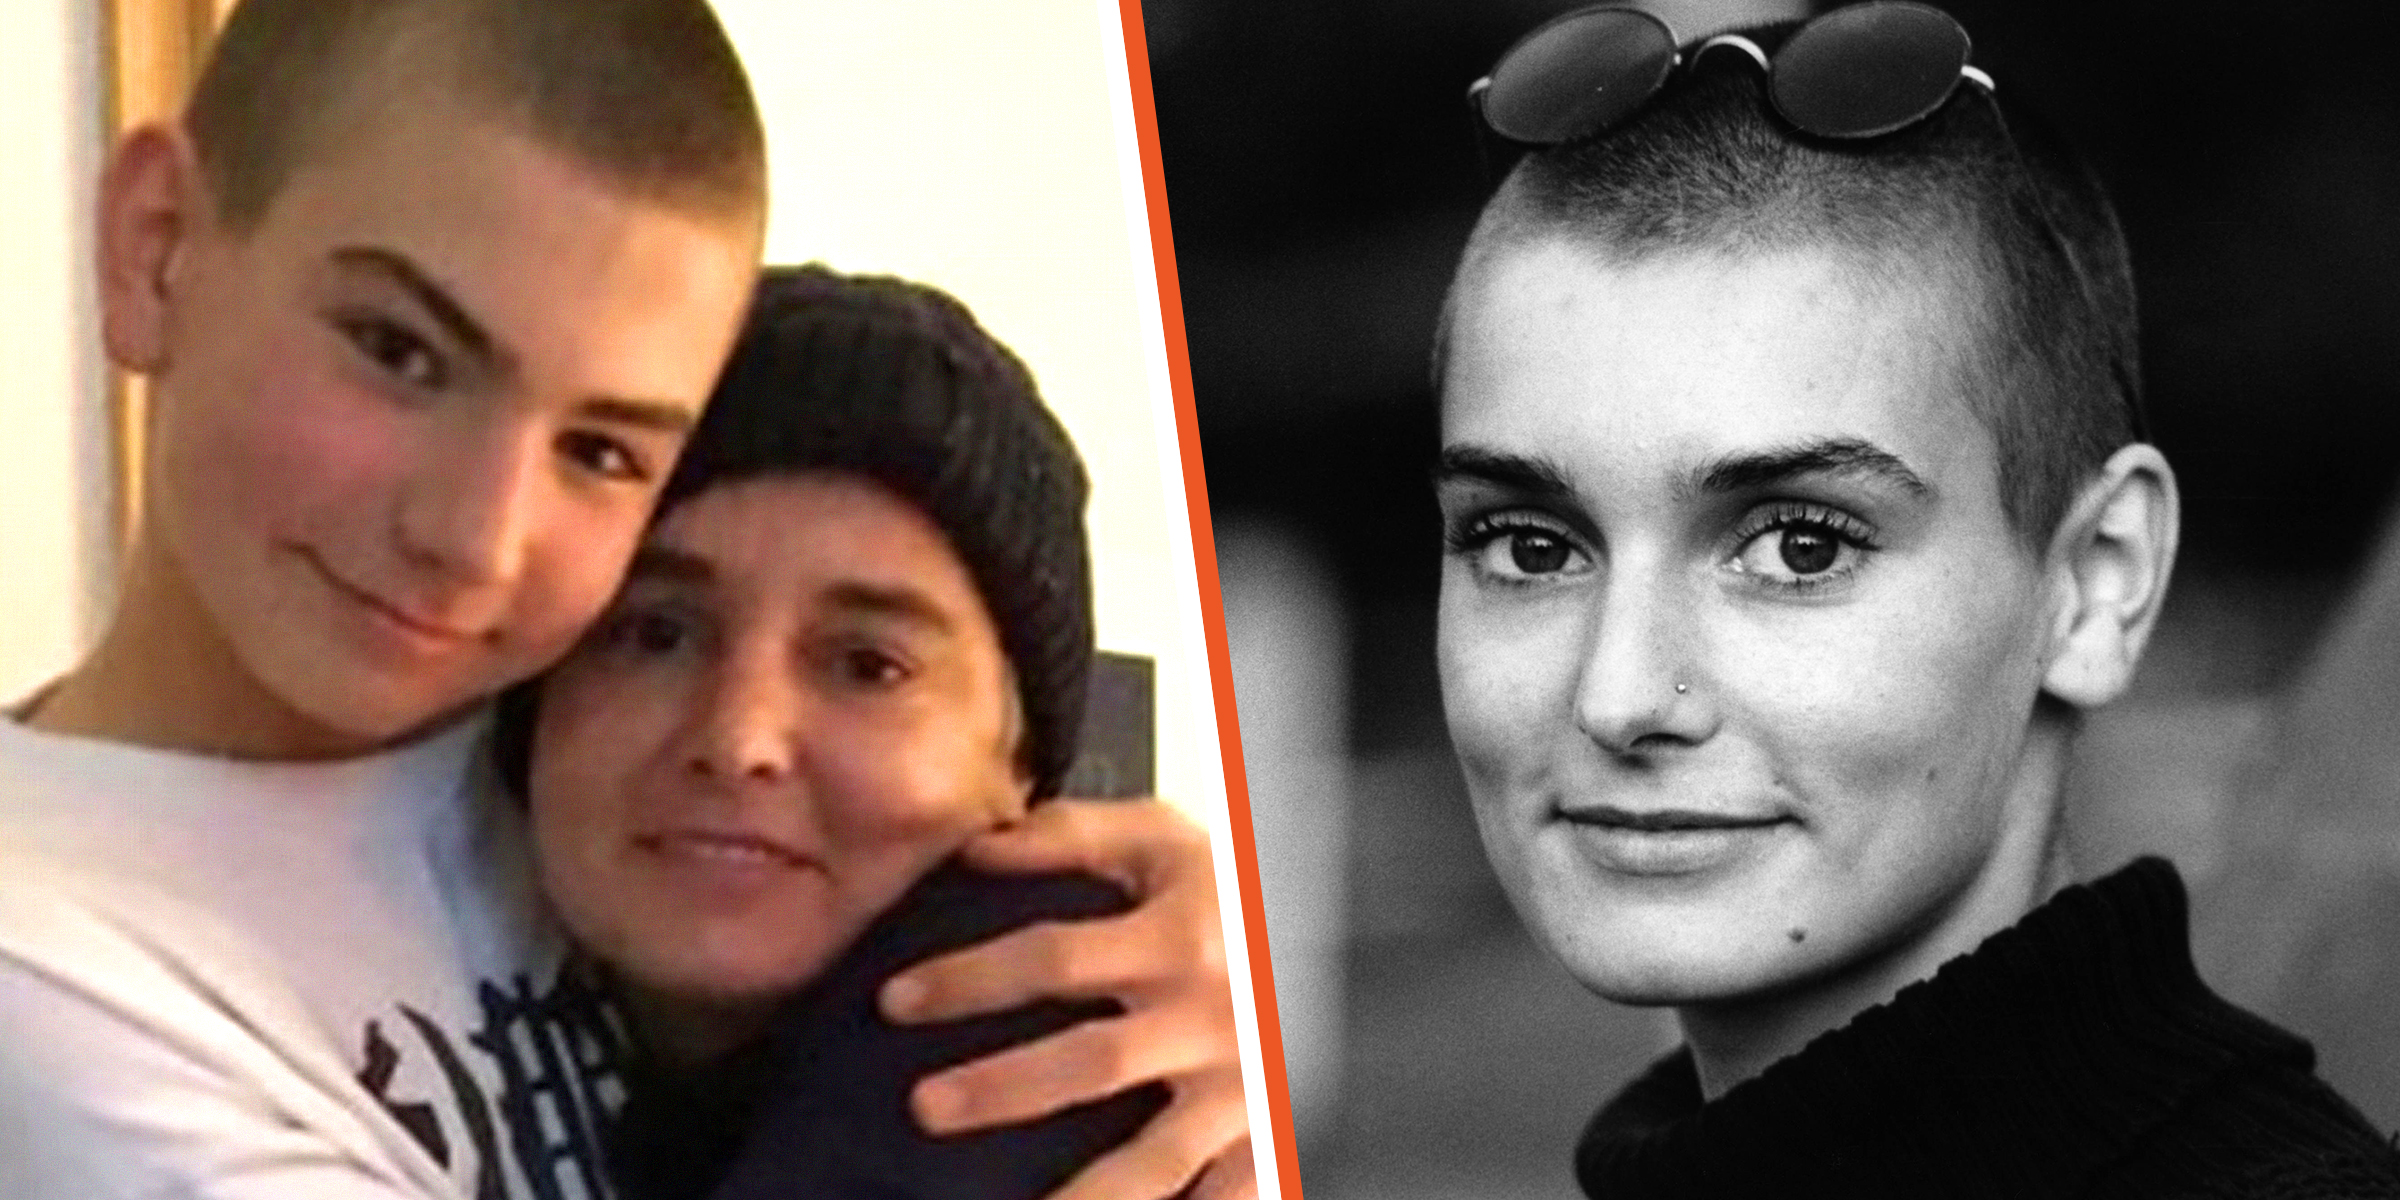 Shane and Sinéad O'Connor | Sources: Twitter/786OmShahid | Getty Images